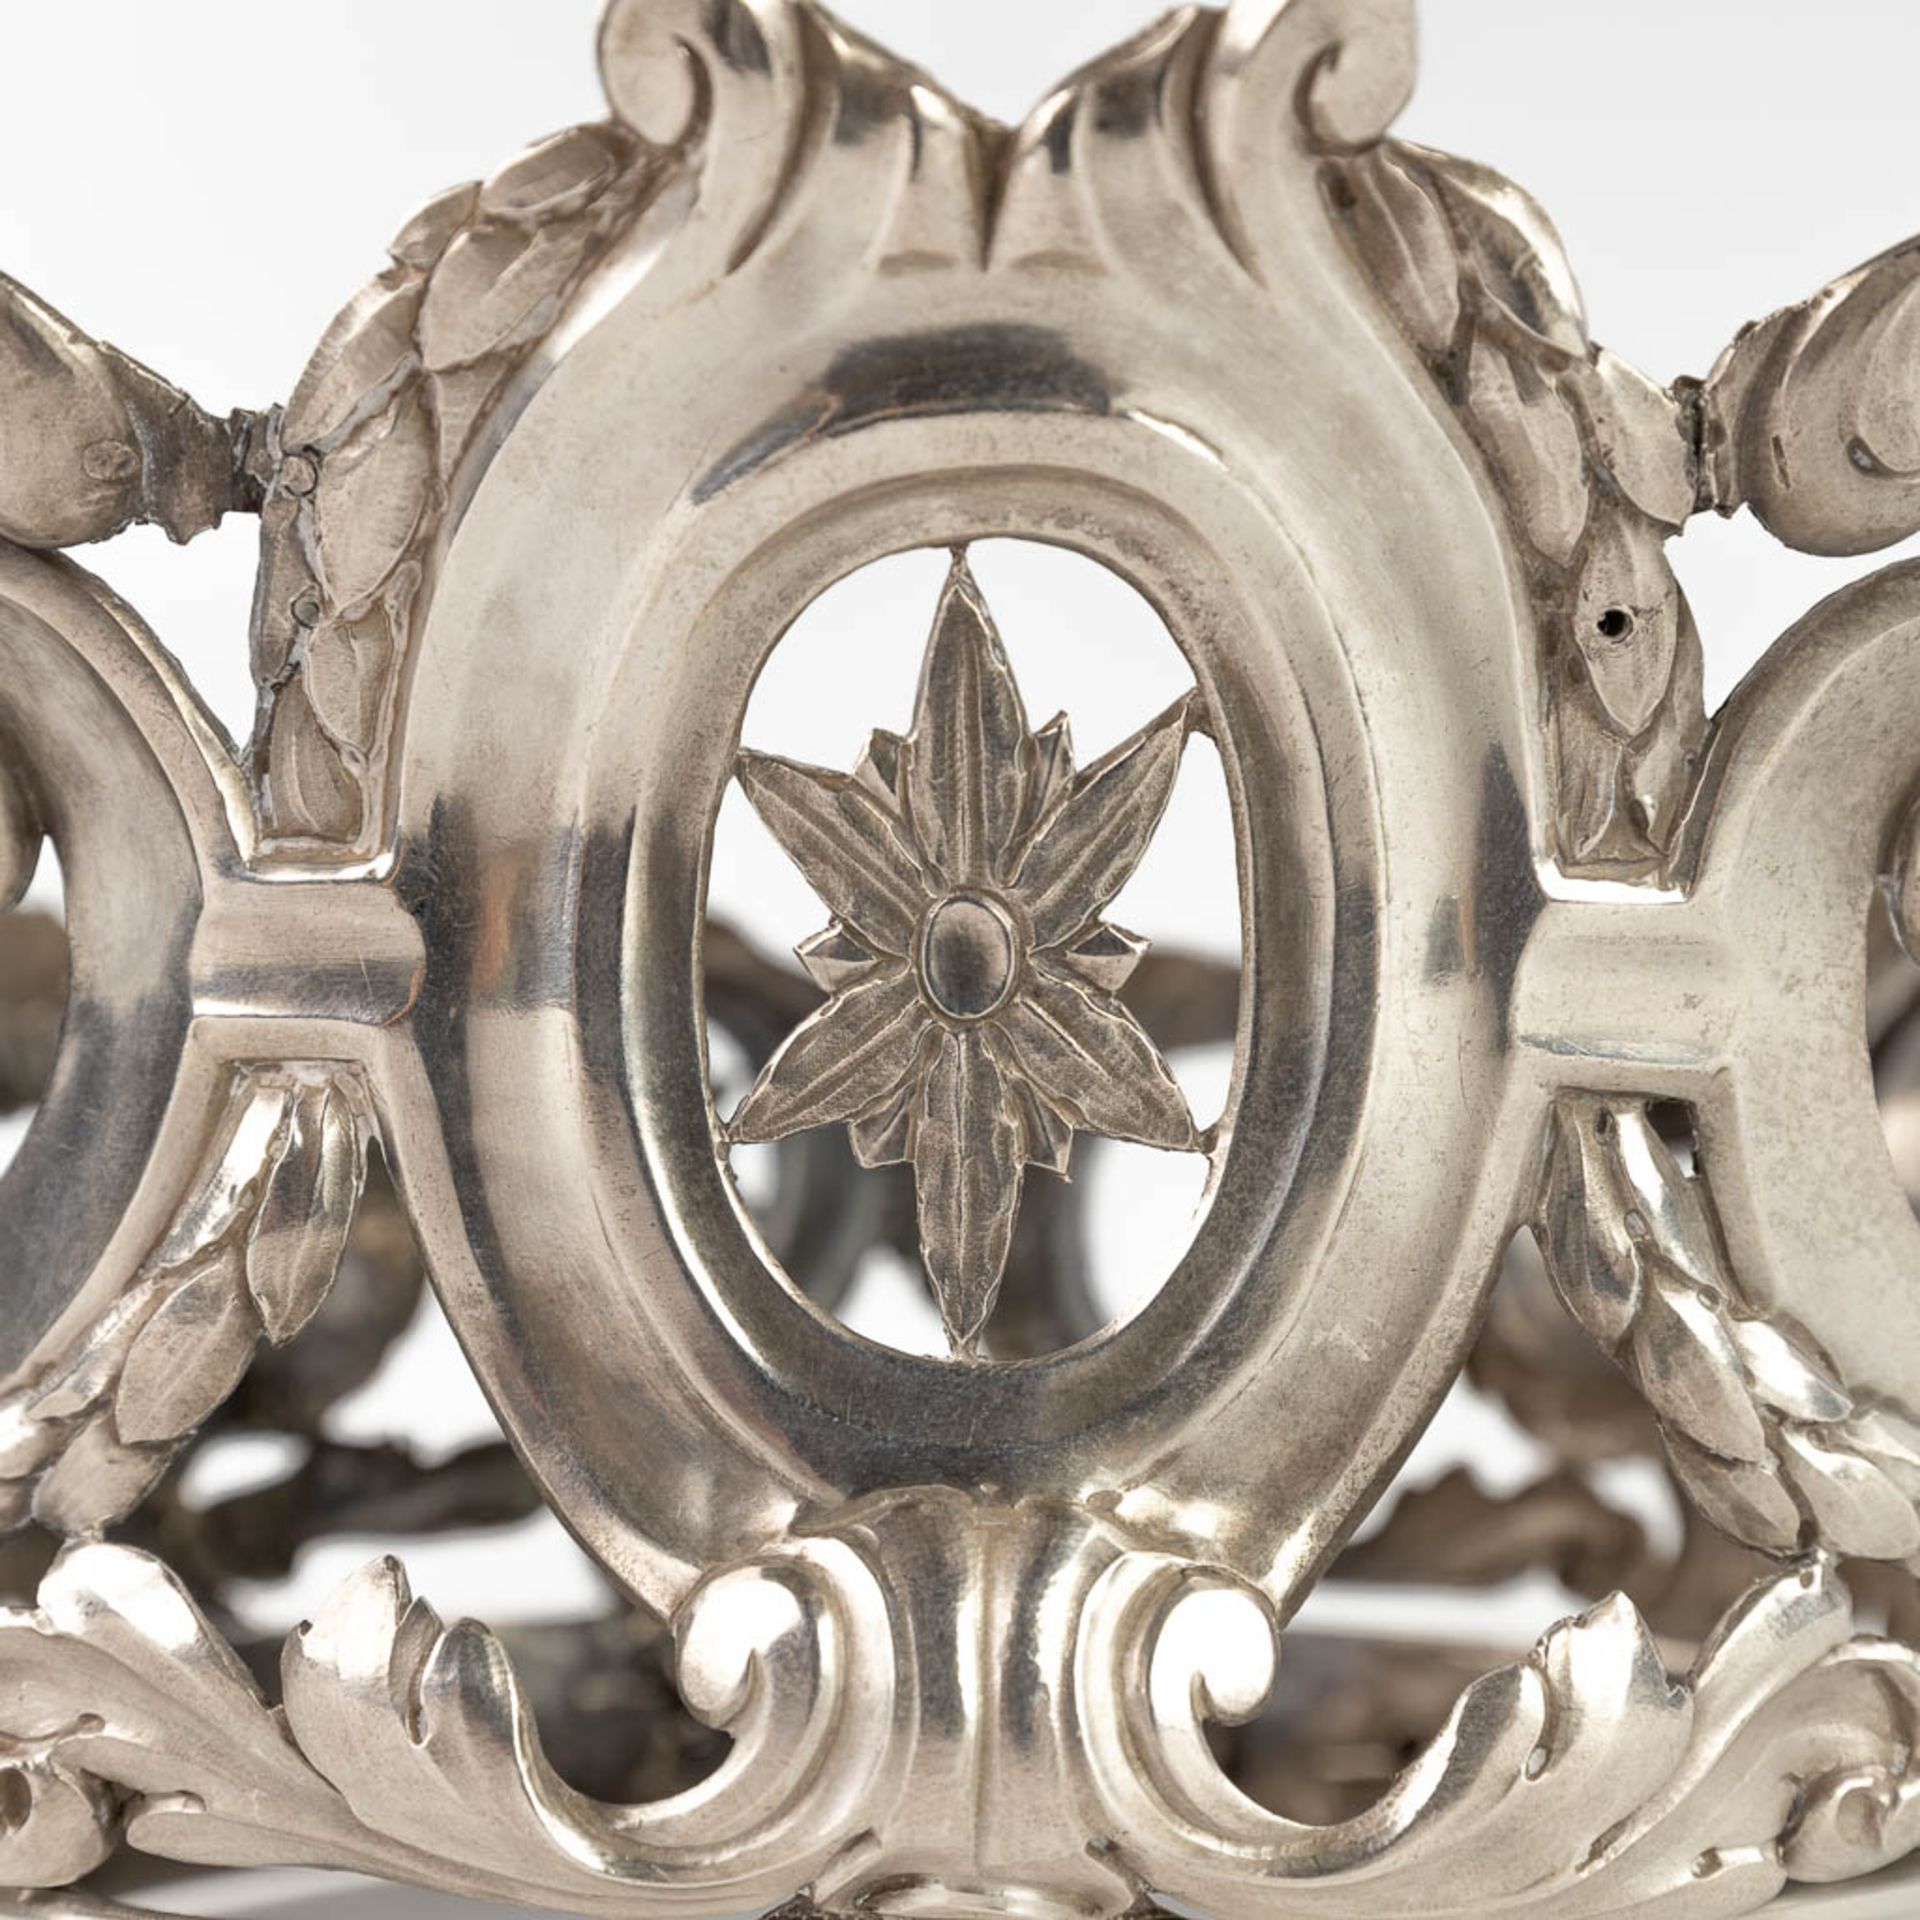 An exceptional crown, silver, Brussels, 1777, 18th C. 592g. (H: 26,5 x D: 11,5 cm) - Image 12 of 21